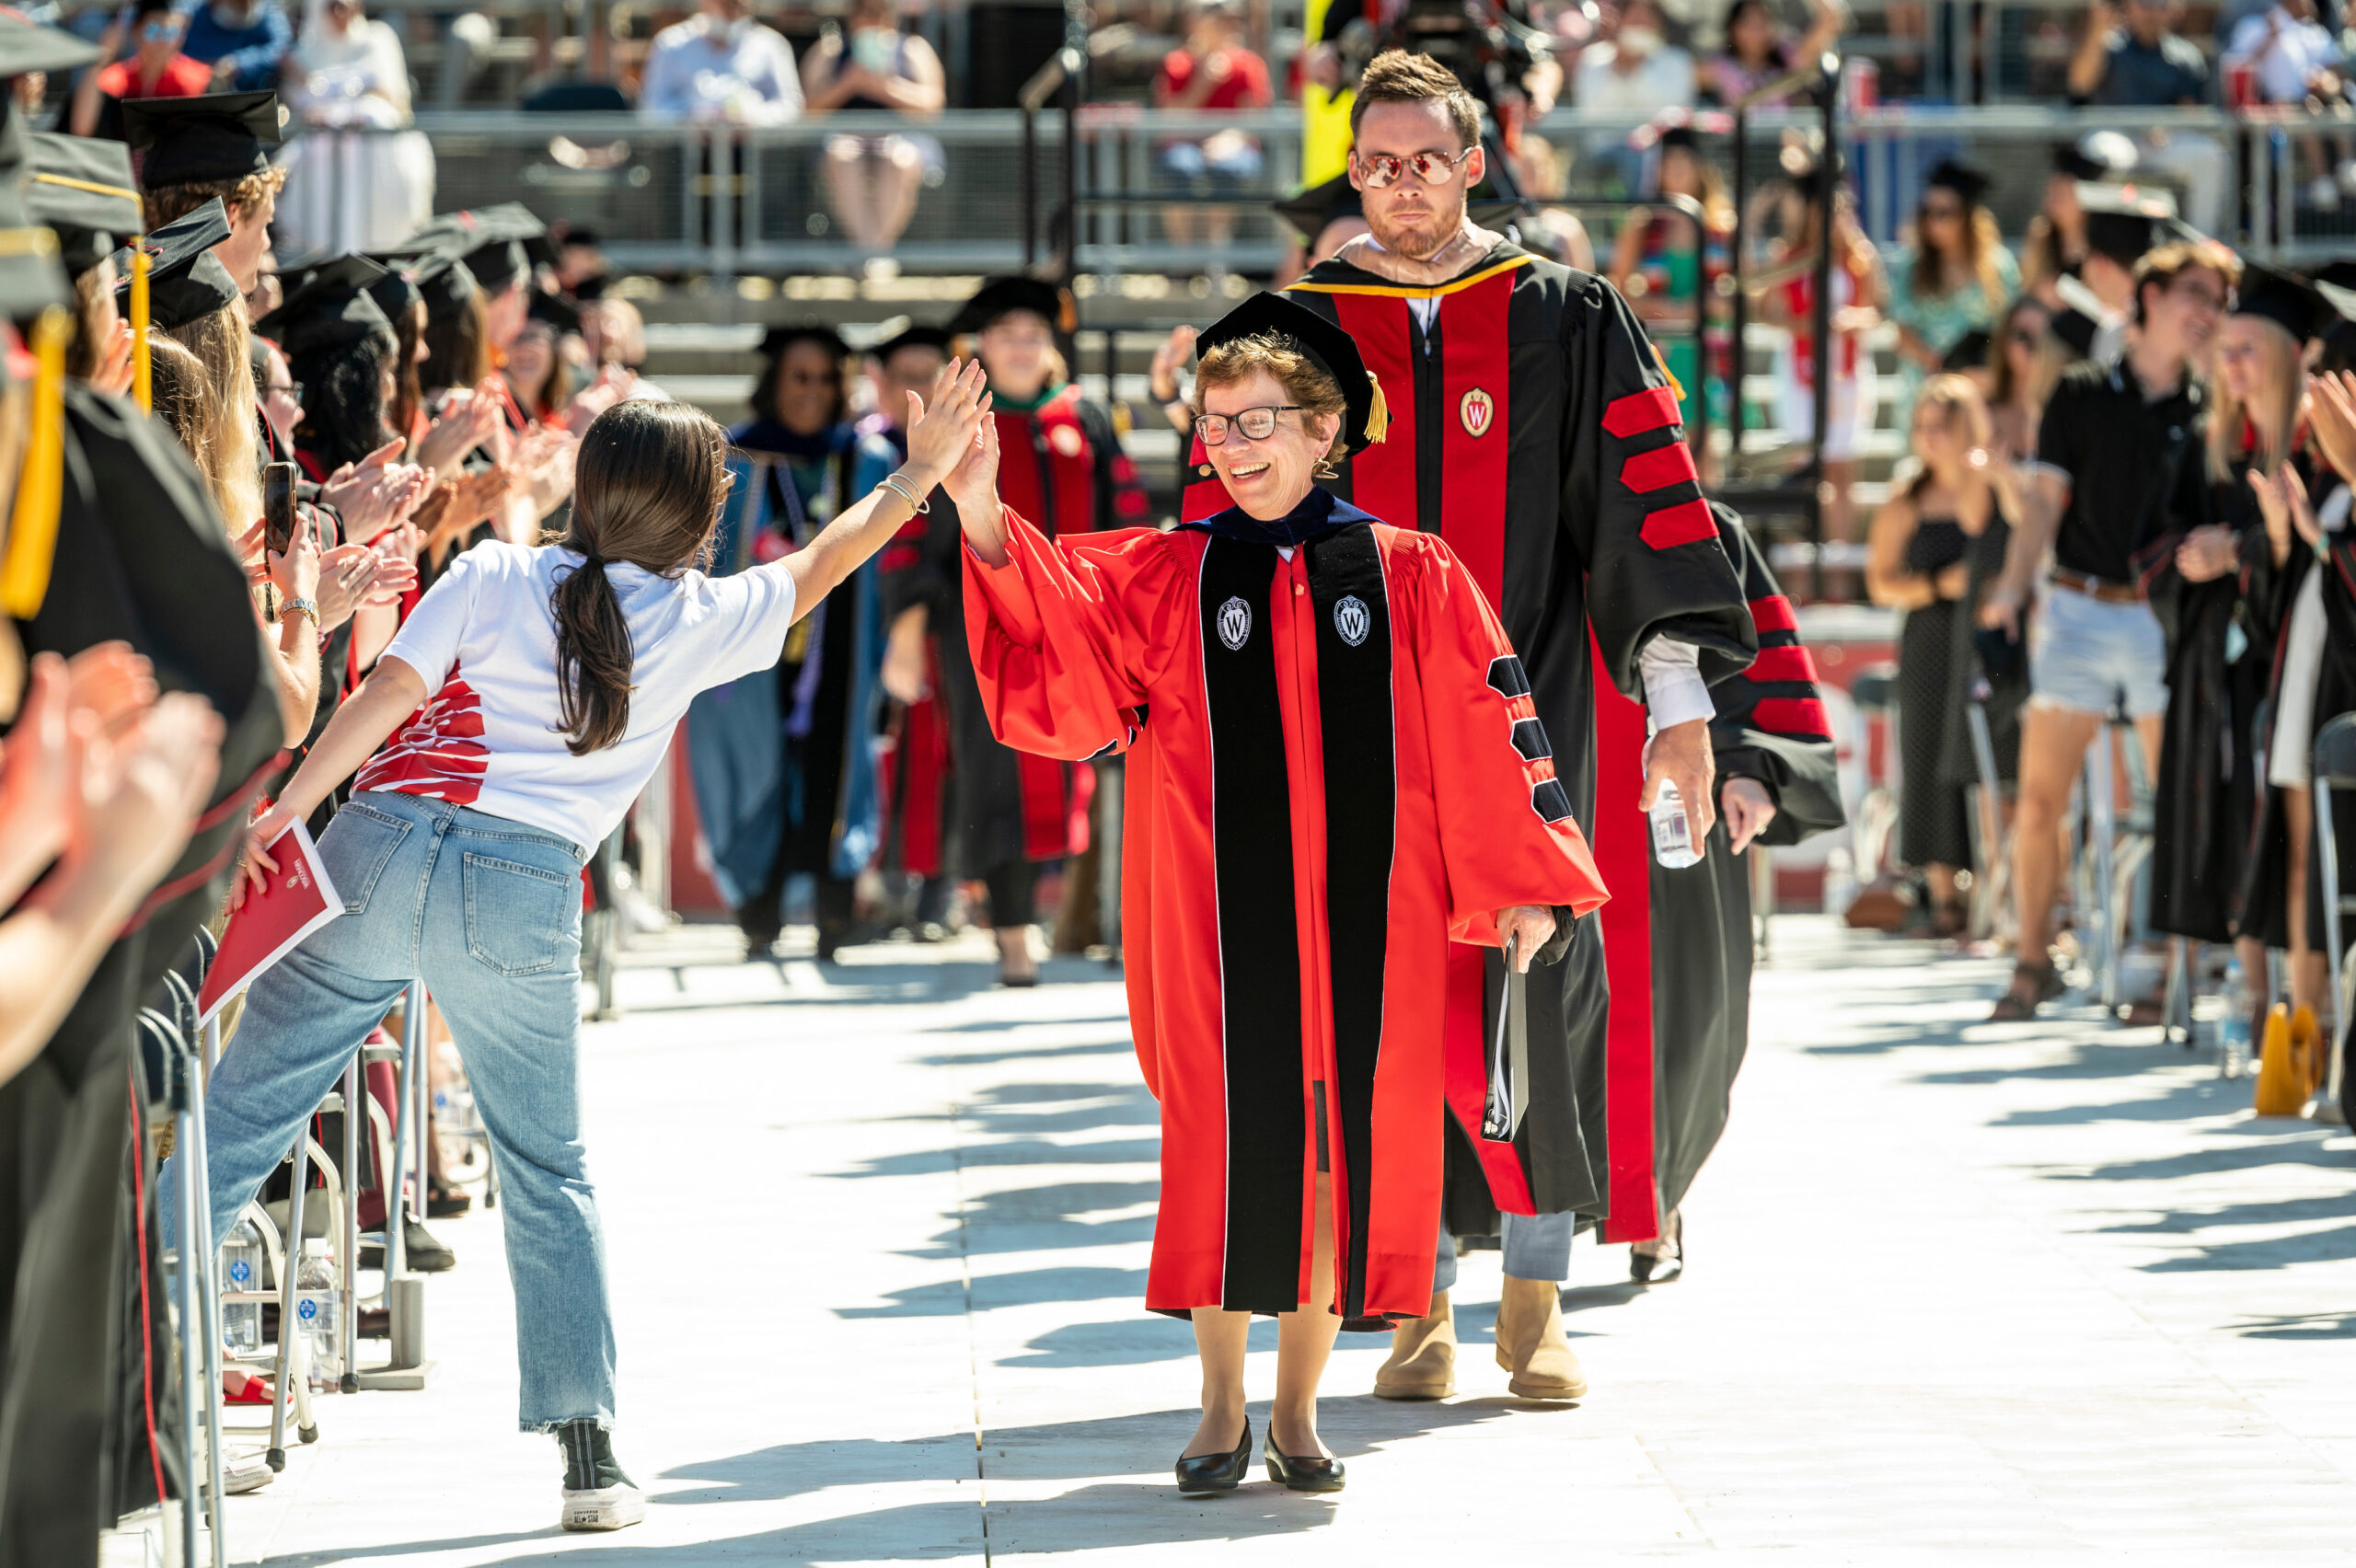 Chancellor Rebecca Blank high-fiving another person